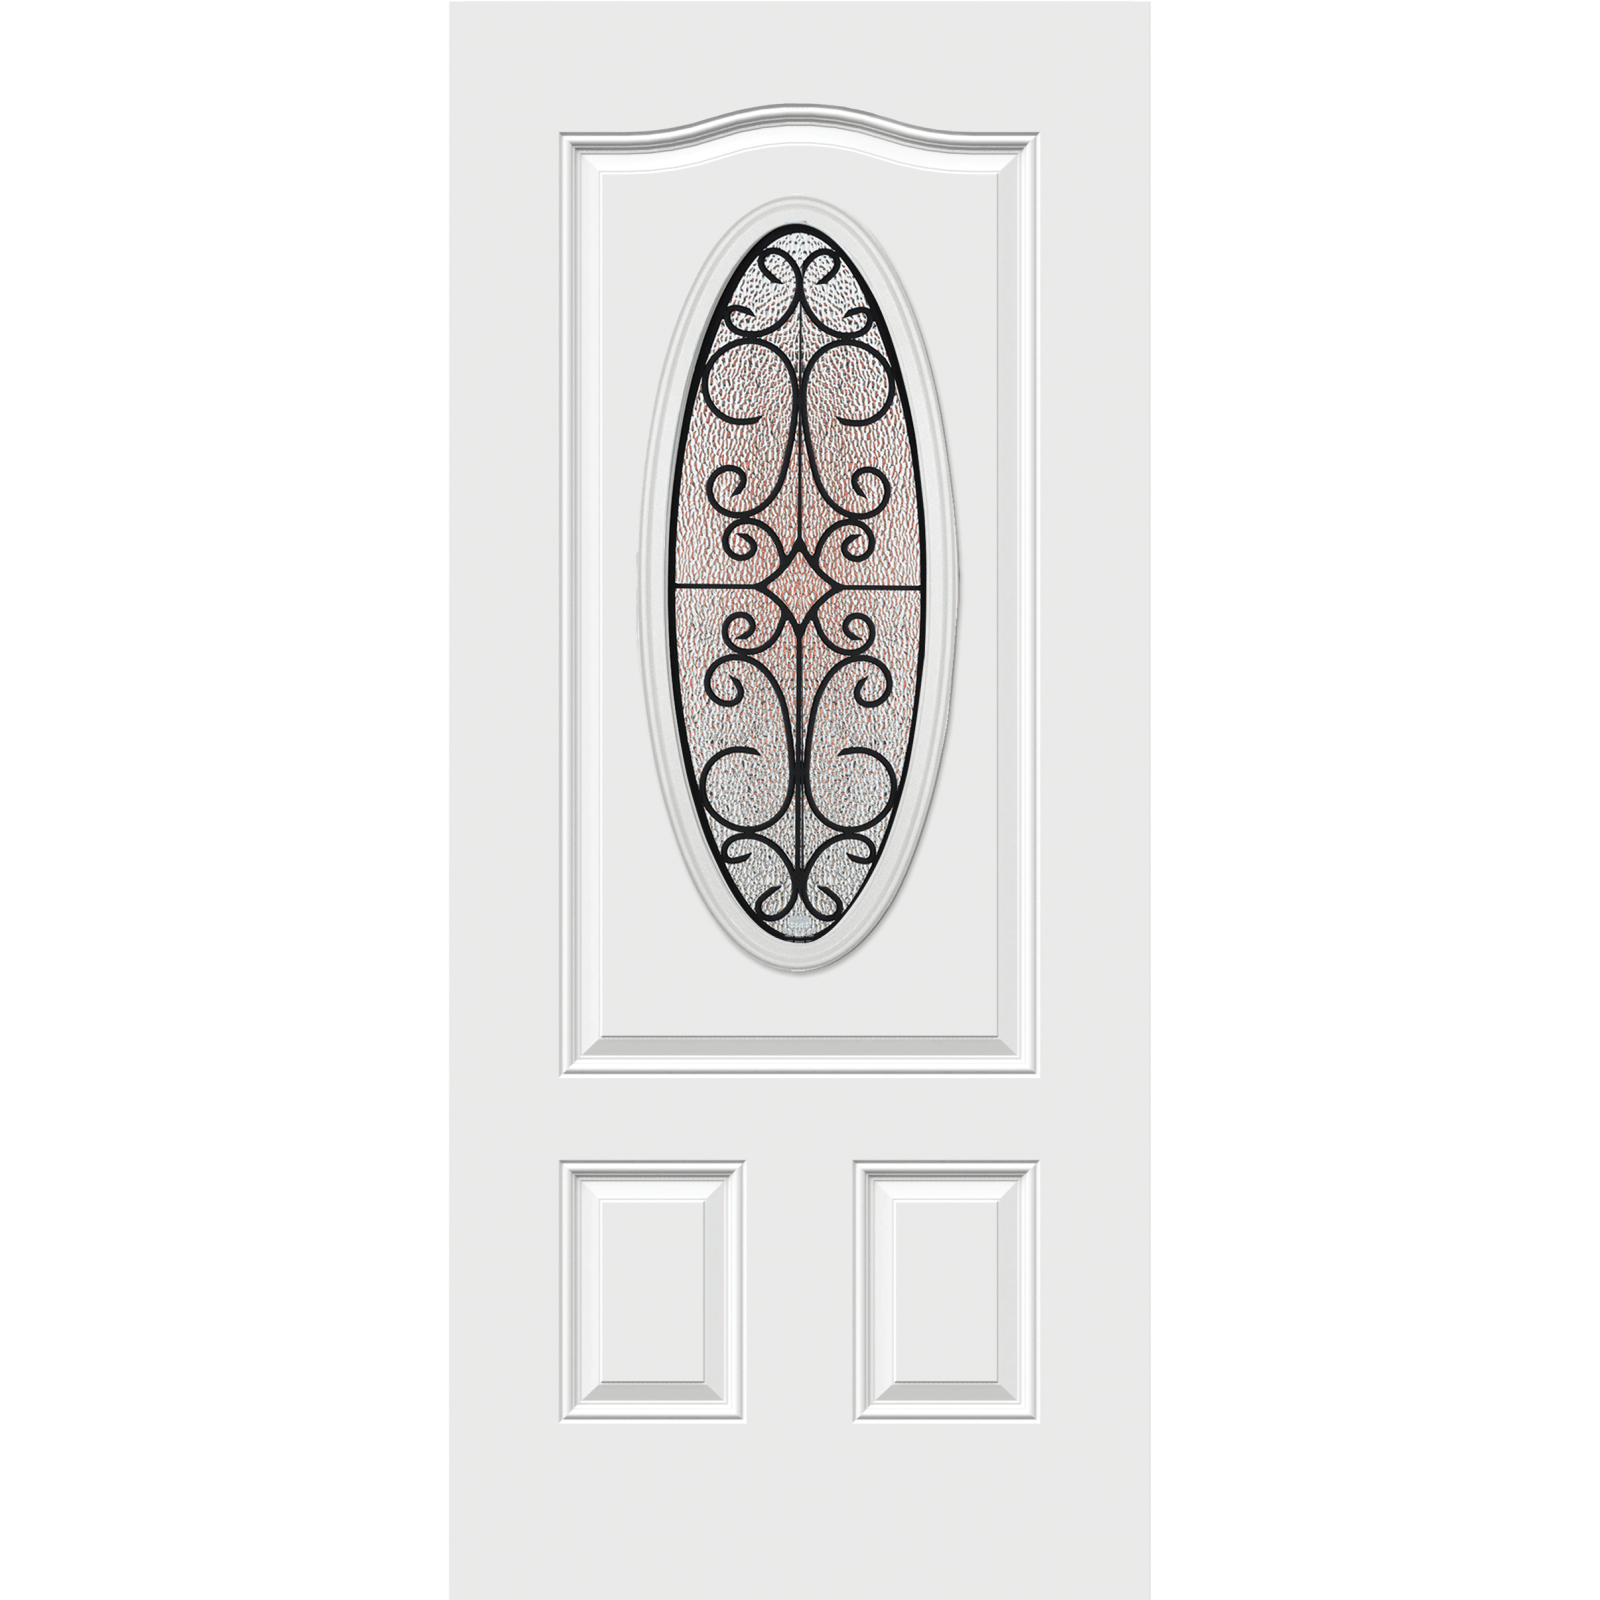 Wycroft Glass and Frame Kit (Small Oval 16" x 39" Frame Size) - Pease Doors: The Door Store